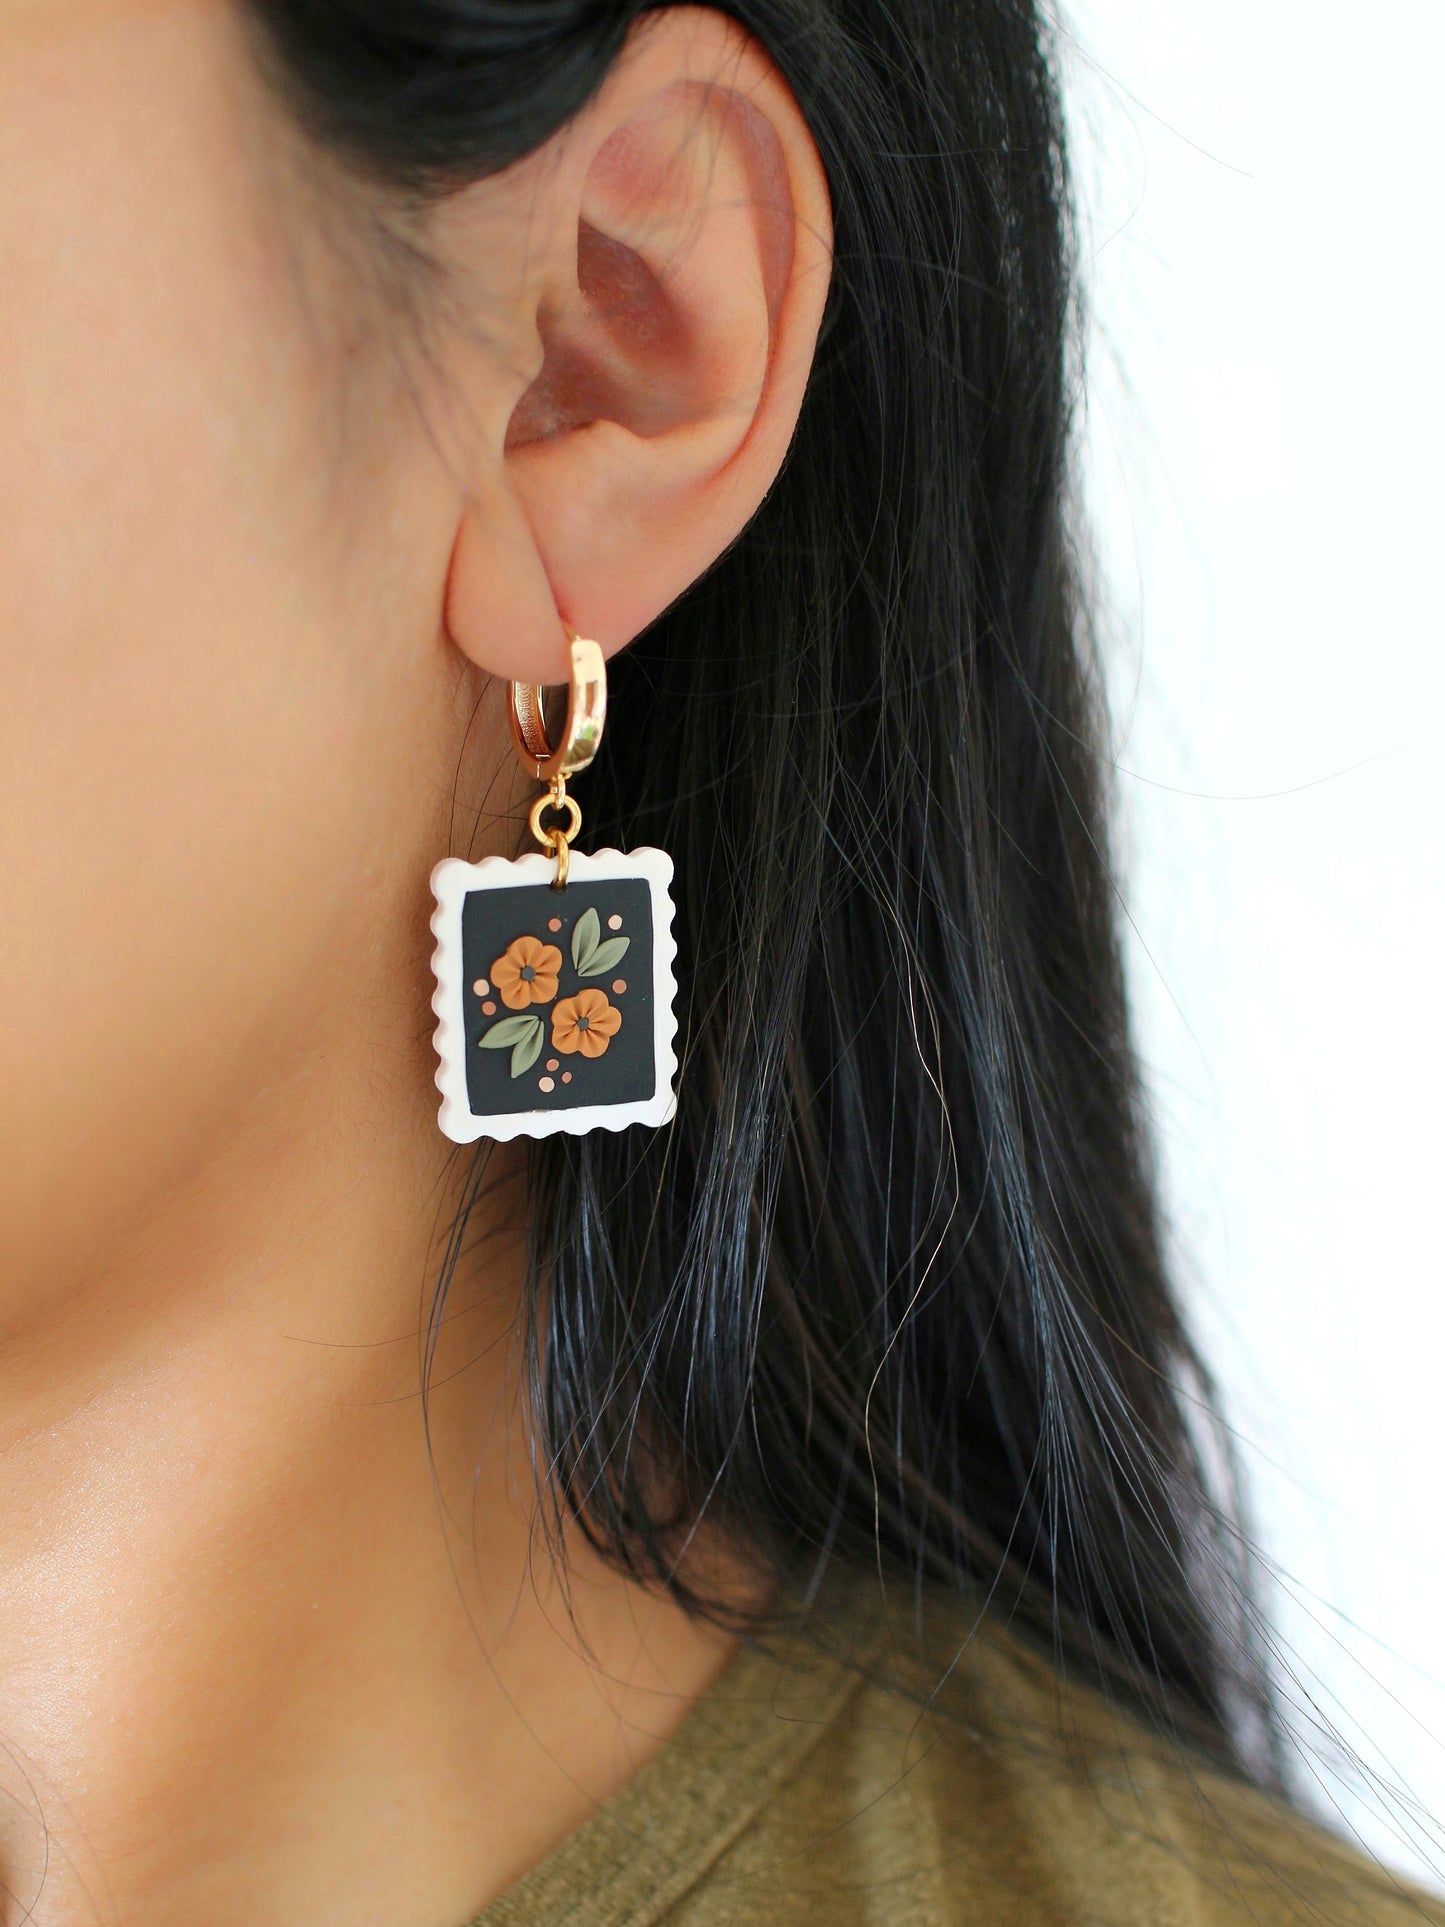 Ginger and Spice - Stamp Earrings